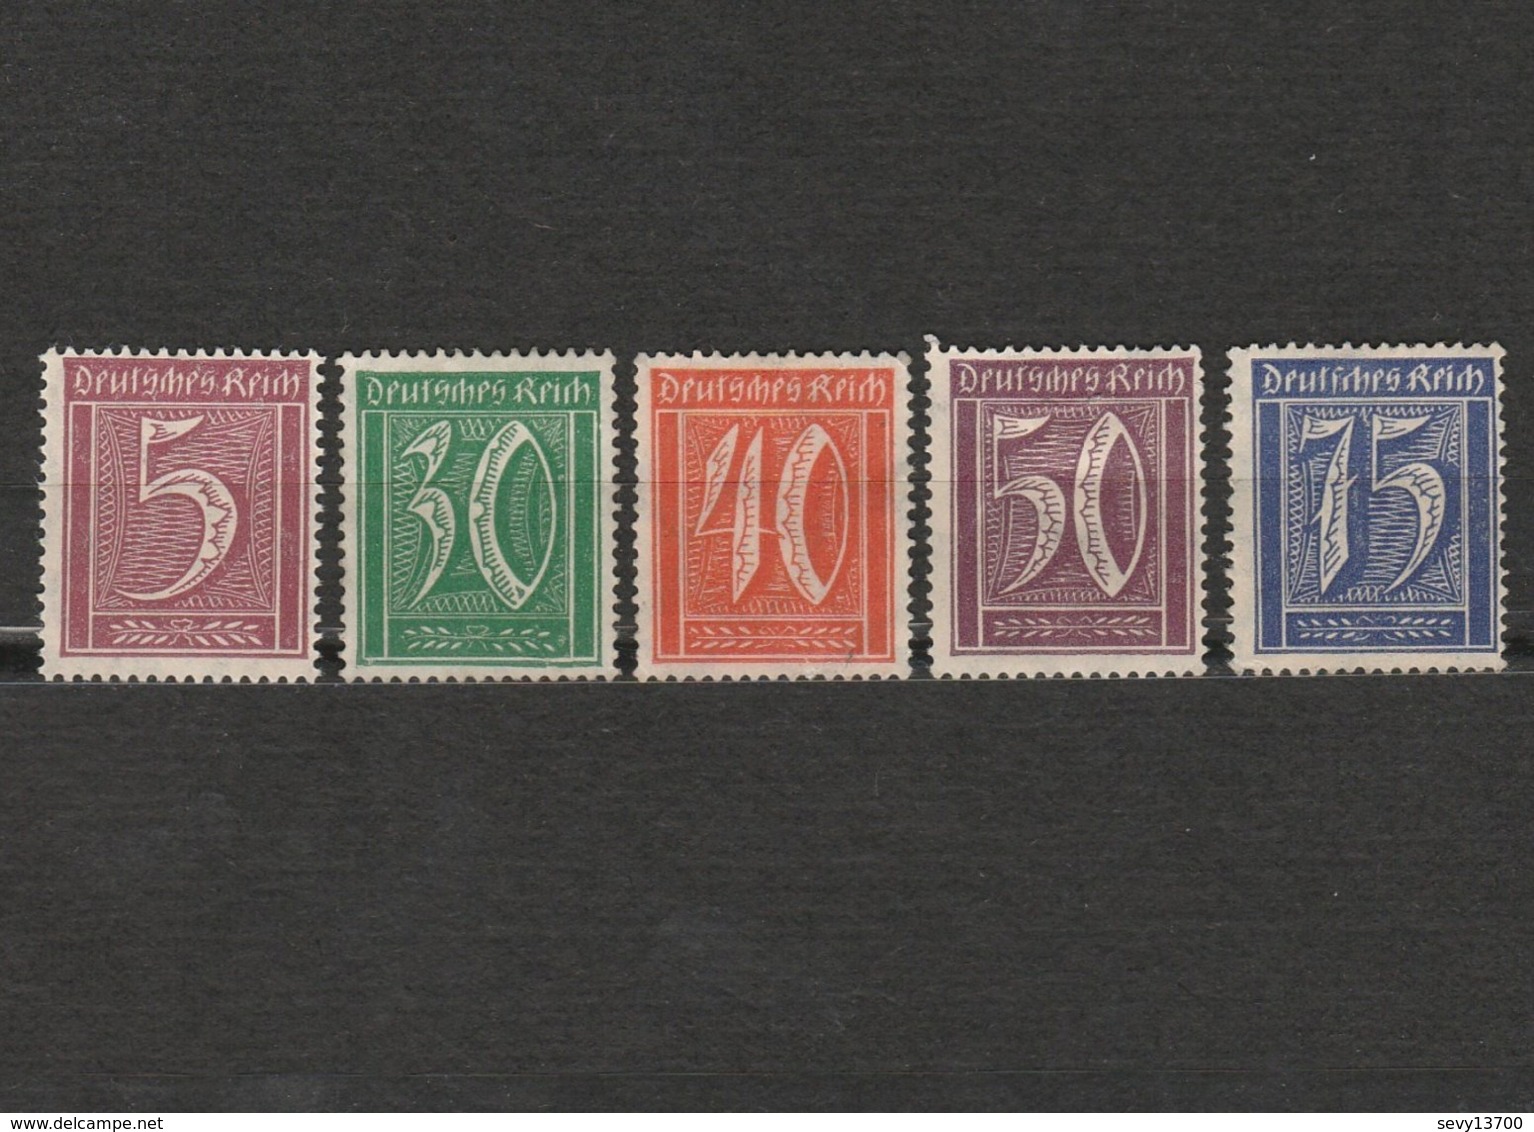 Lot 5 Timbres Chiffre - Allemagne - Deutsches Reich - Dont 2 Neufs Année 1922 Mi 177 - 181 - 182 - 183 - 185 - Used Stamps